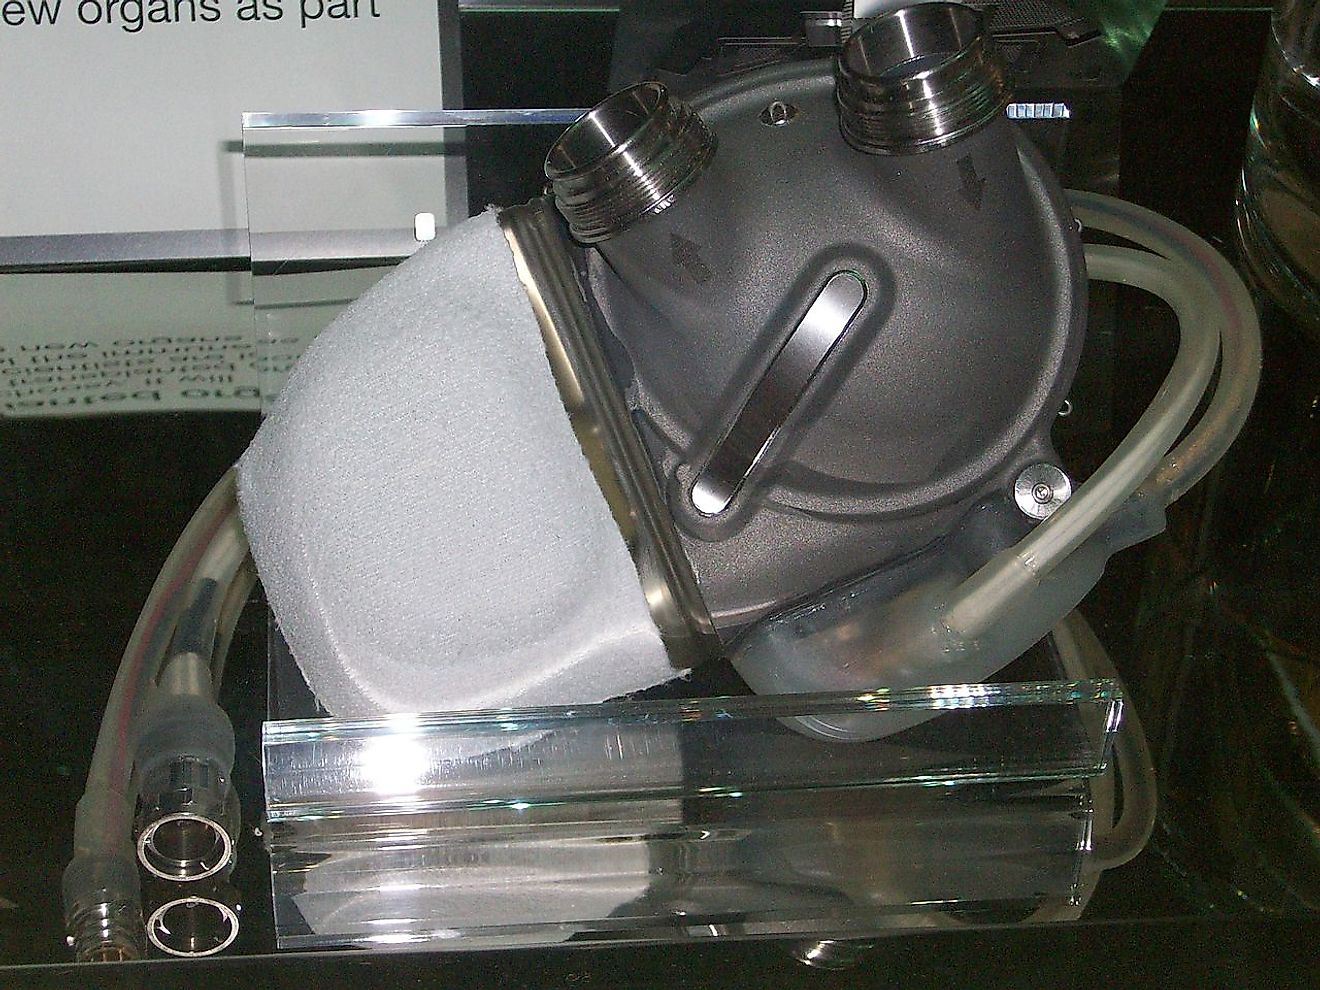 An image of an artificial heart exhibited at London science museum. Image credit: Rick Proser/Wikimedia.org